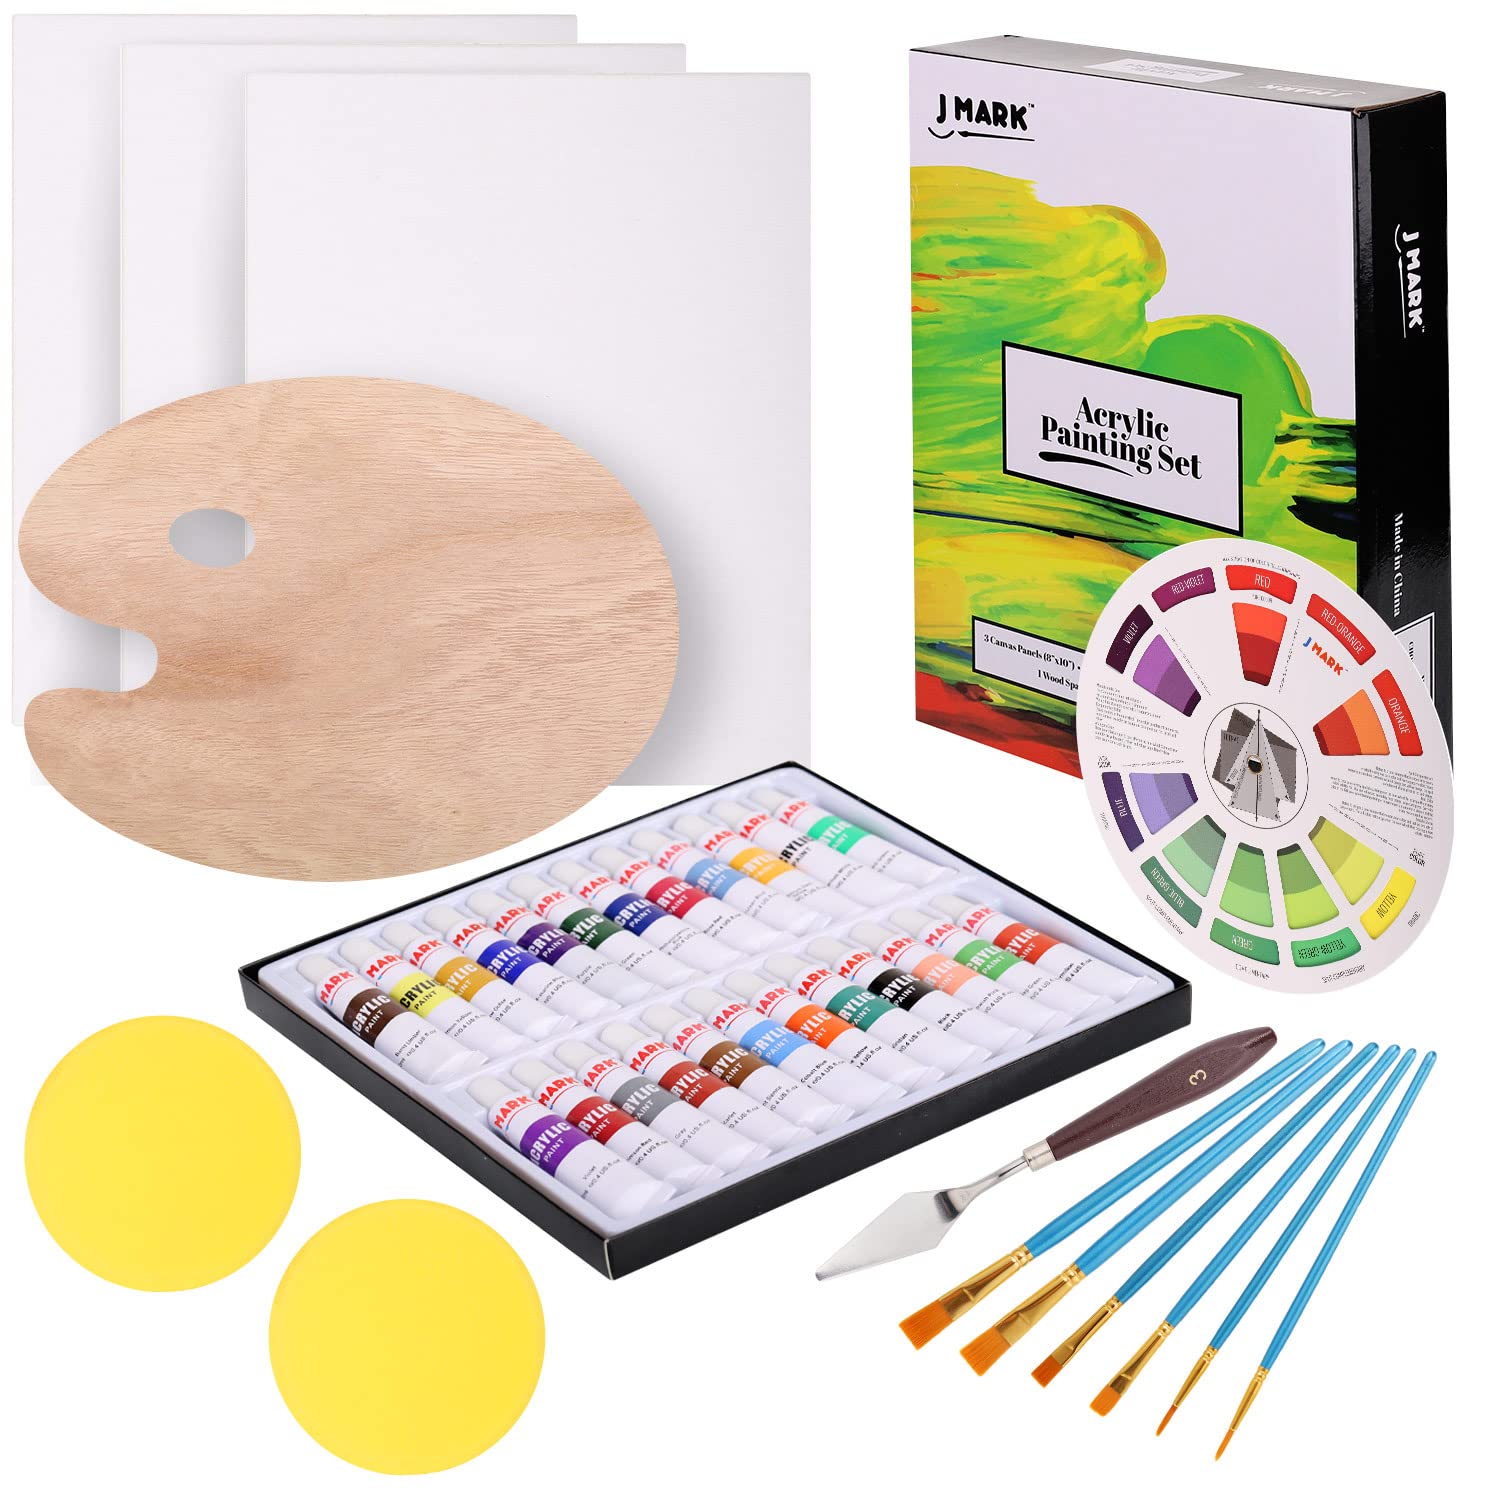 Painting Kit for Adults - 39 Piece Set Includes 24 Acrylic Paints, 3  Canvas, 6 Brushes, Wood Palette, Table Easel, Color Wheel, Spatula - Art  Supplies for Beginners - Ideal Gift or Date Night Activity 